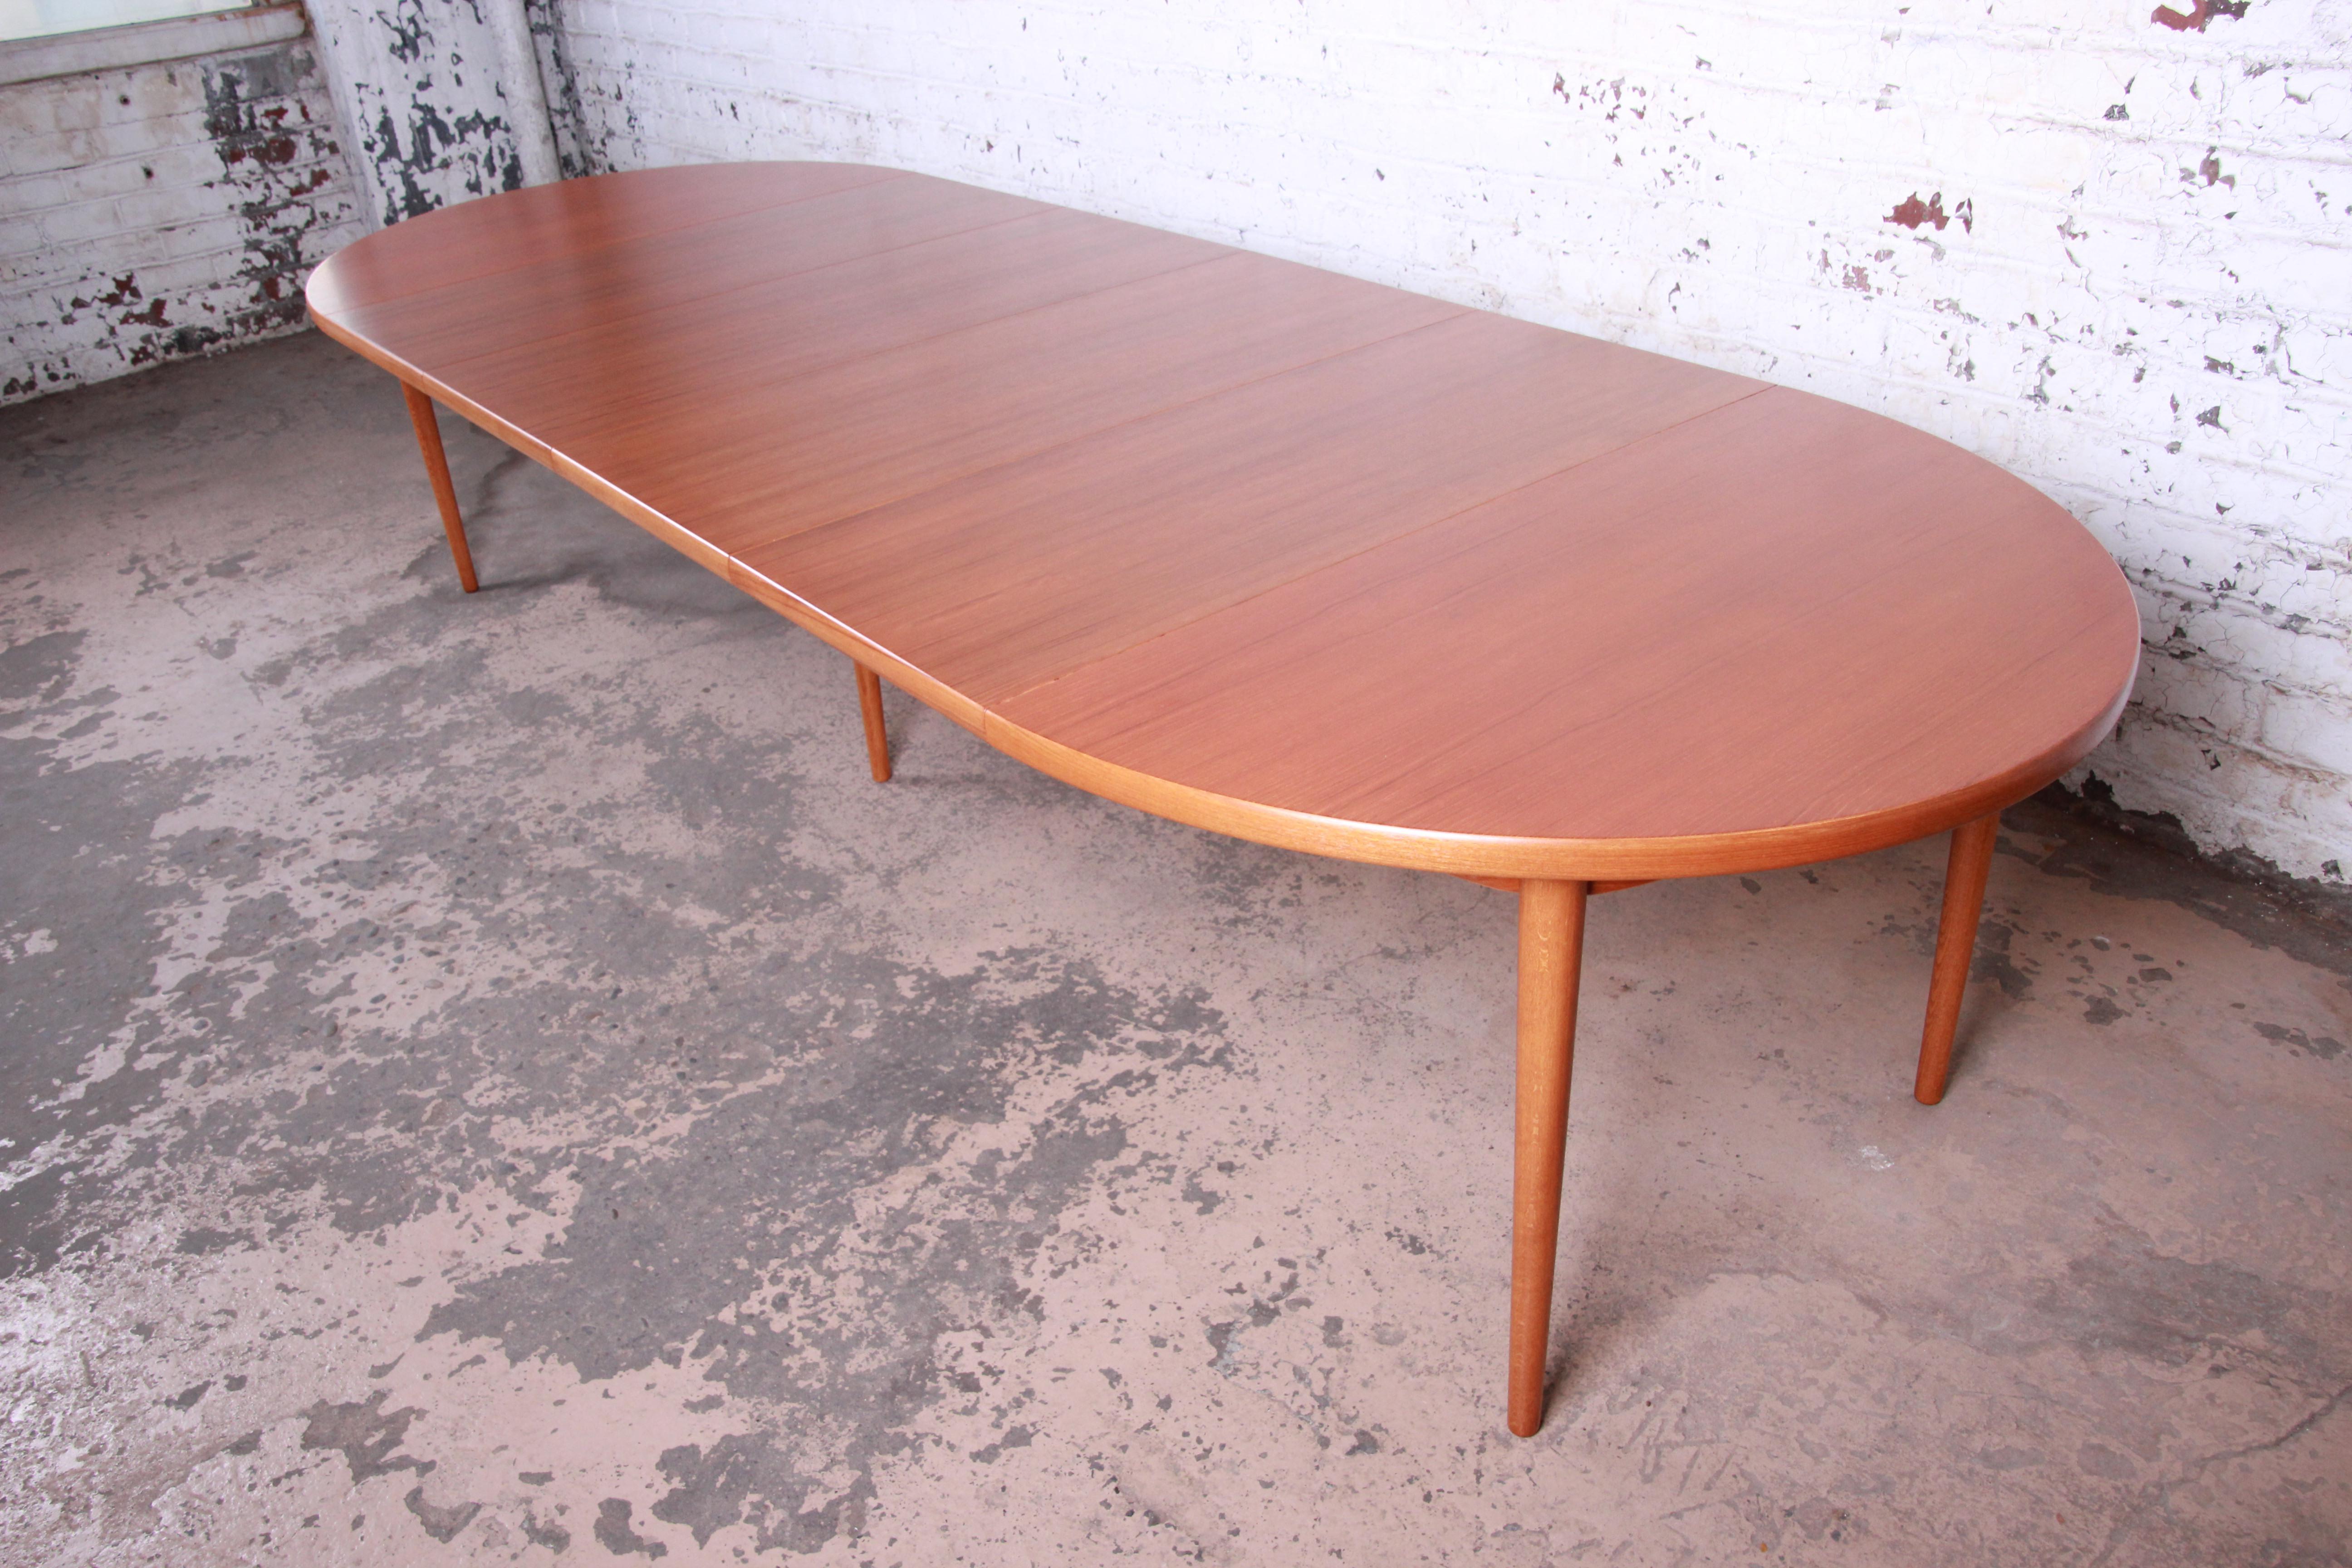 An outstanding midcentury Swedish modern teak extension dining table by Harry Østergaard for Moreddi. The table features gorgeous teak wood grain and sleek Scandinavian design. It is extremely versatile with four large leaves that can extend the